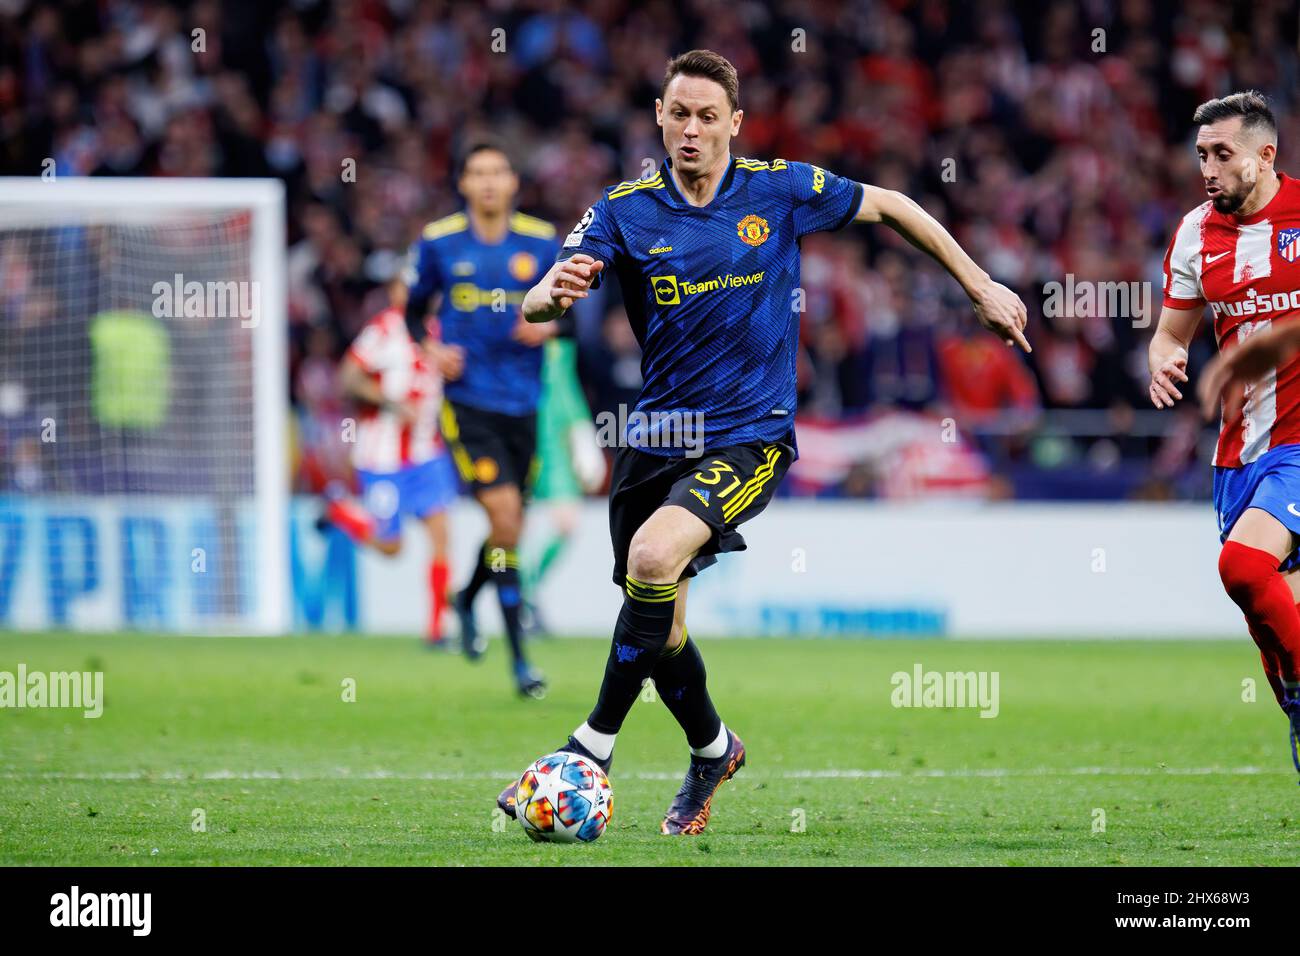 MADRID - FEB 23: Nemanja Matic in action at the Champions League match between Club Atletico de Madrid and Manchester United at the Metropolitano Stad Stock Photo